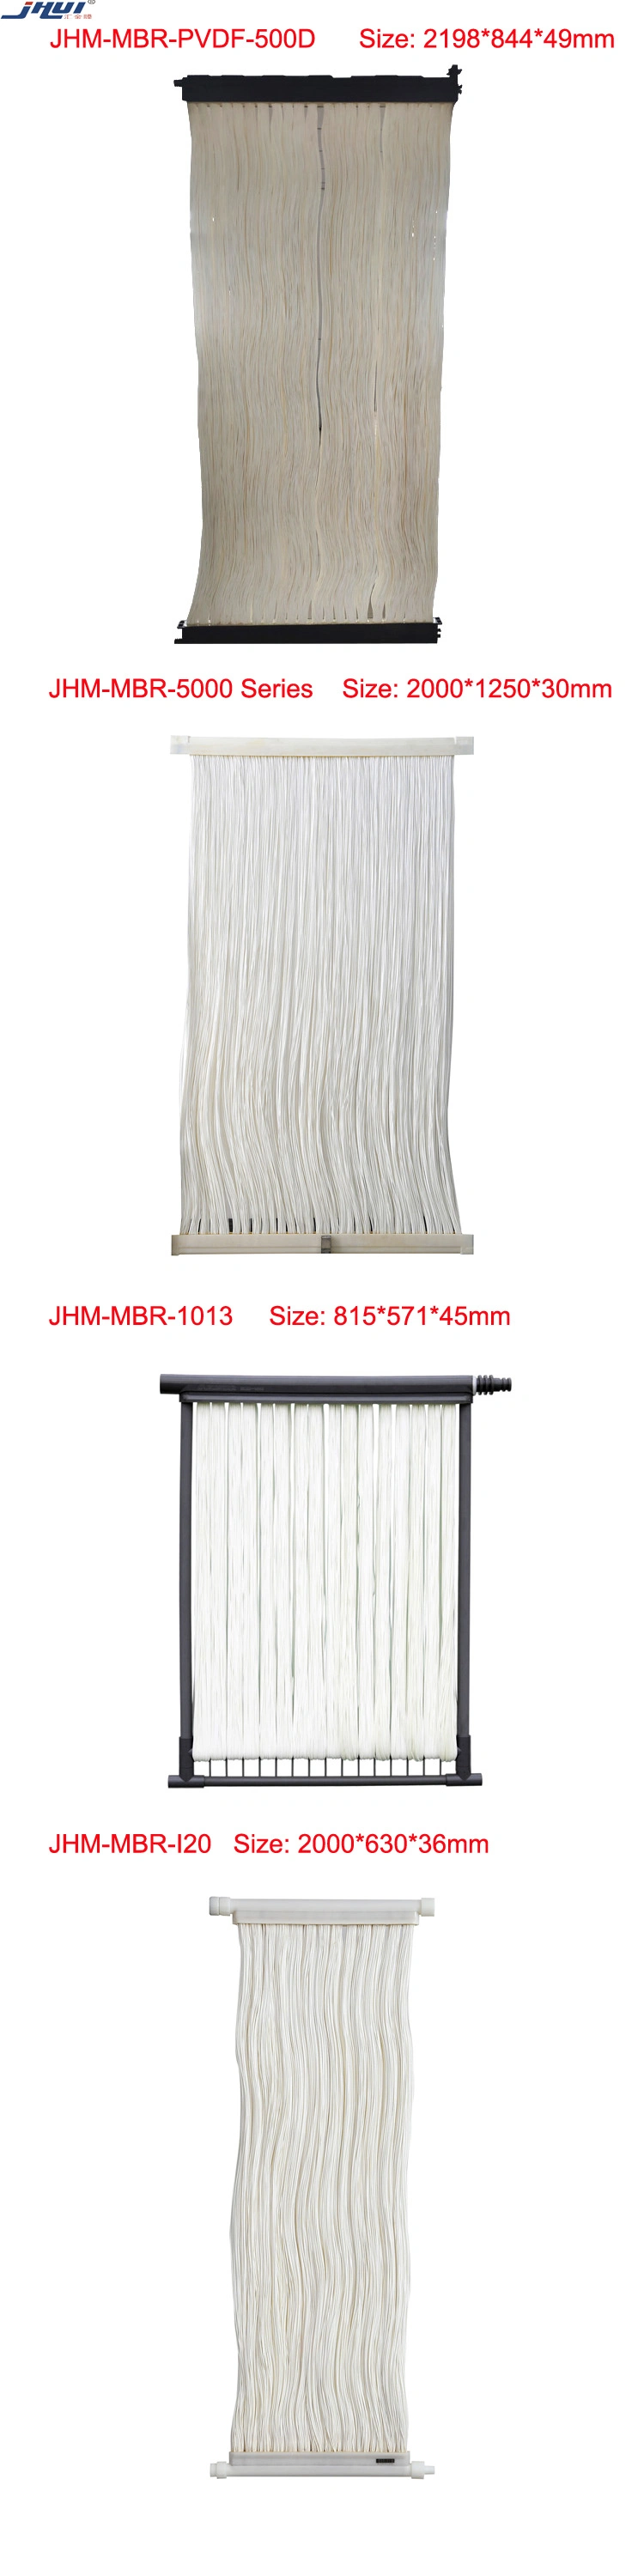 Jhm-Mbr-500d-PVDF Mbr for Municipal Wastewater Treatment